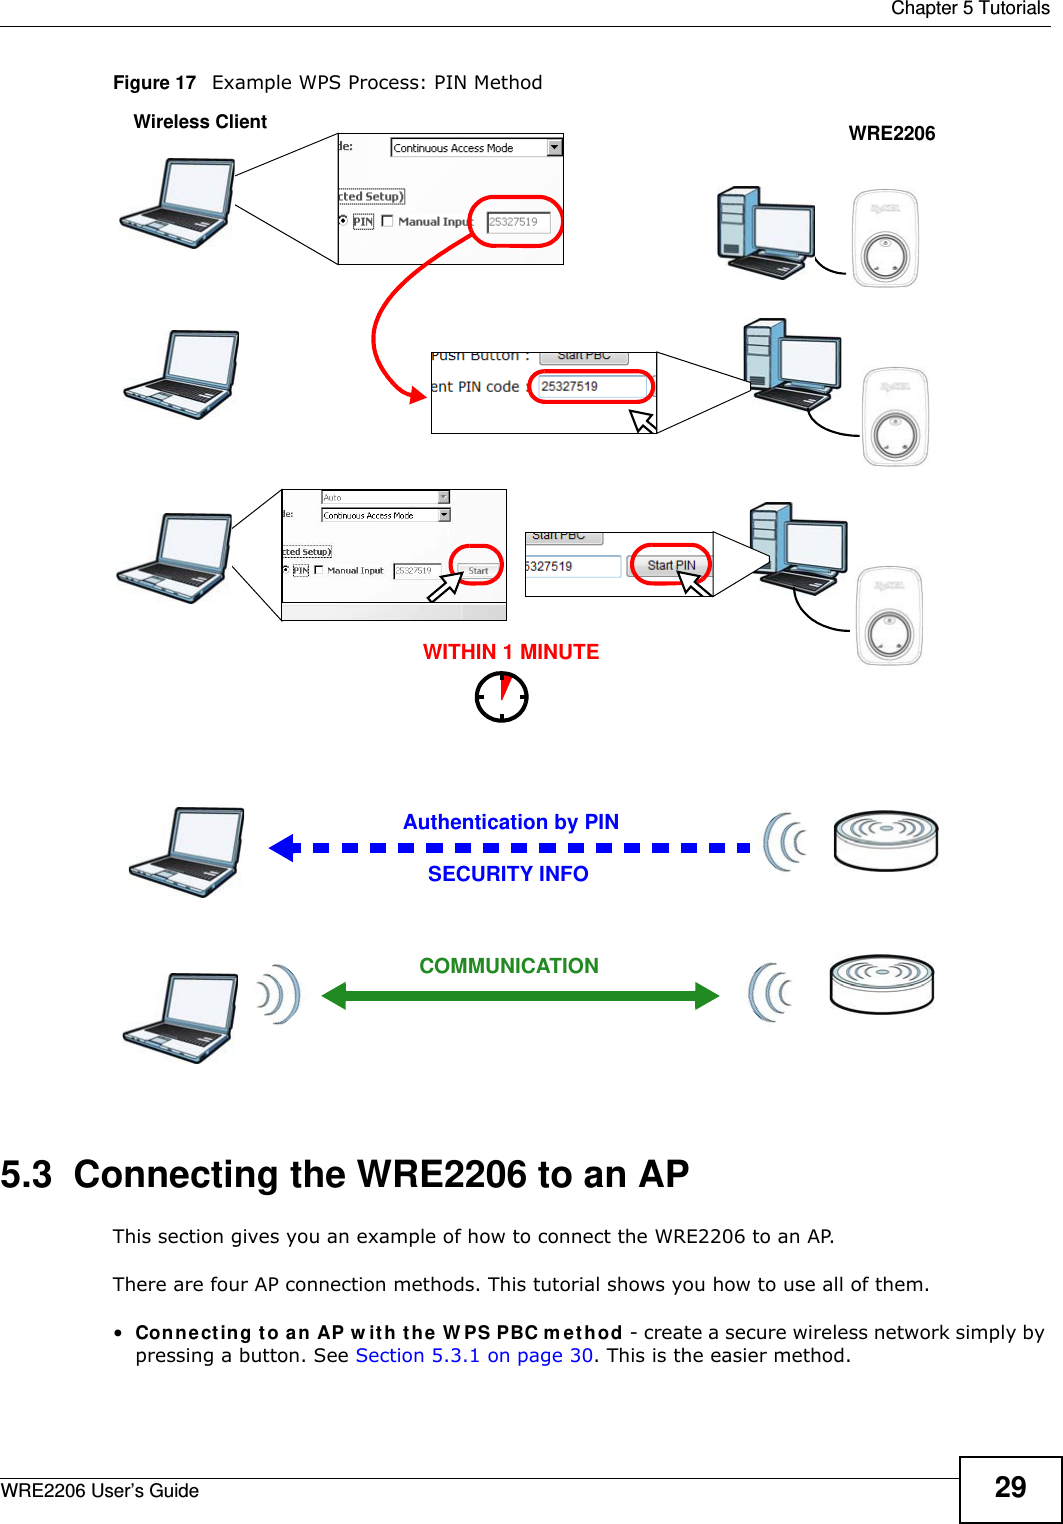  Chapter 5 TutorialsWRE2206 User’s Guide 29Figure 17   Example WPS Process: PIN Method5.3  Connecting the WRE2206 to an APThis section gives you an example of how to connect the WRE2206 to an AP.There are four AP connection methods. This tutorial shows you how to use all of them.•Con ne cting t o a n AP w ith t he  W PS PBC m ethod - create a secure wireless network simply by pressing a button. See Section 5.3.1 on page 30. This is the easier method.Authentication by PINSECURITY INFOWITHIN 1 MINUTEWireless ClientWRE2206COMMUNICATION